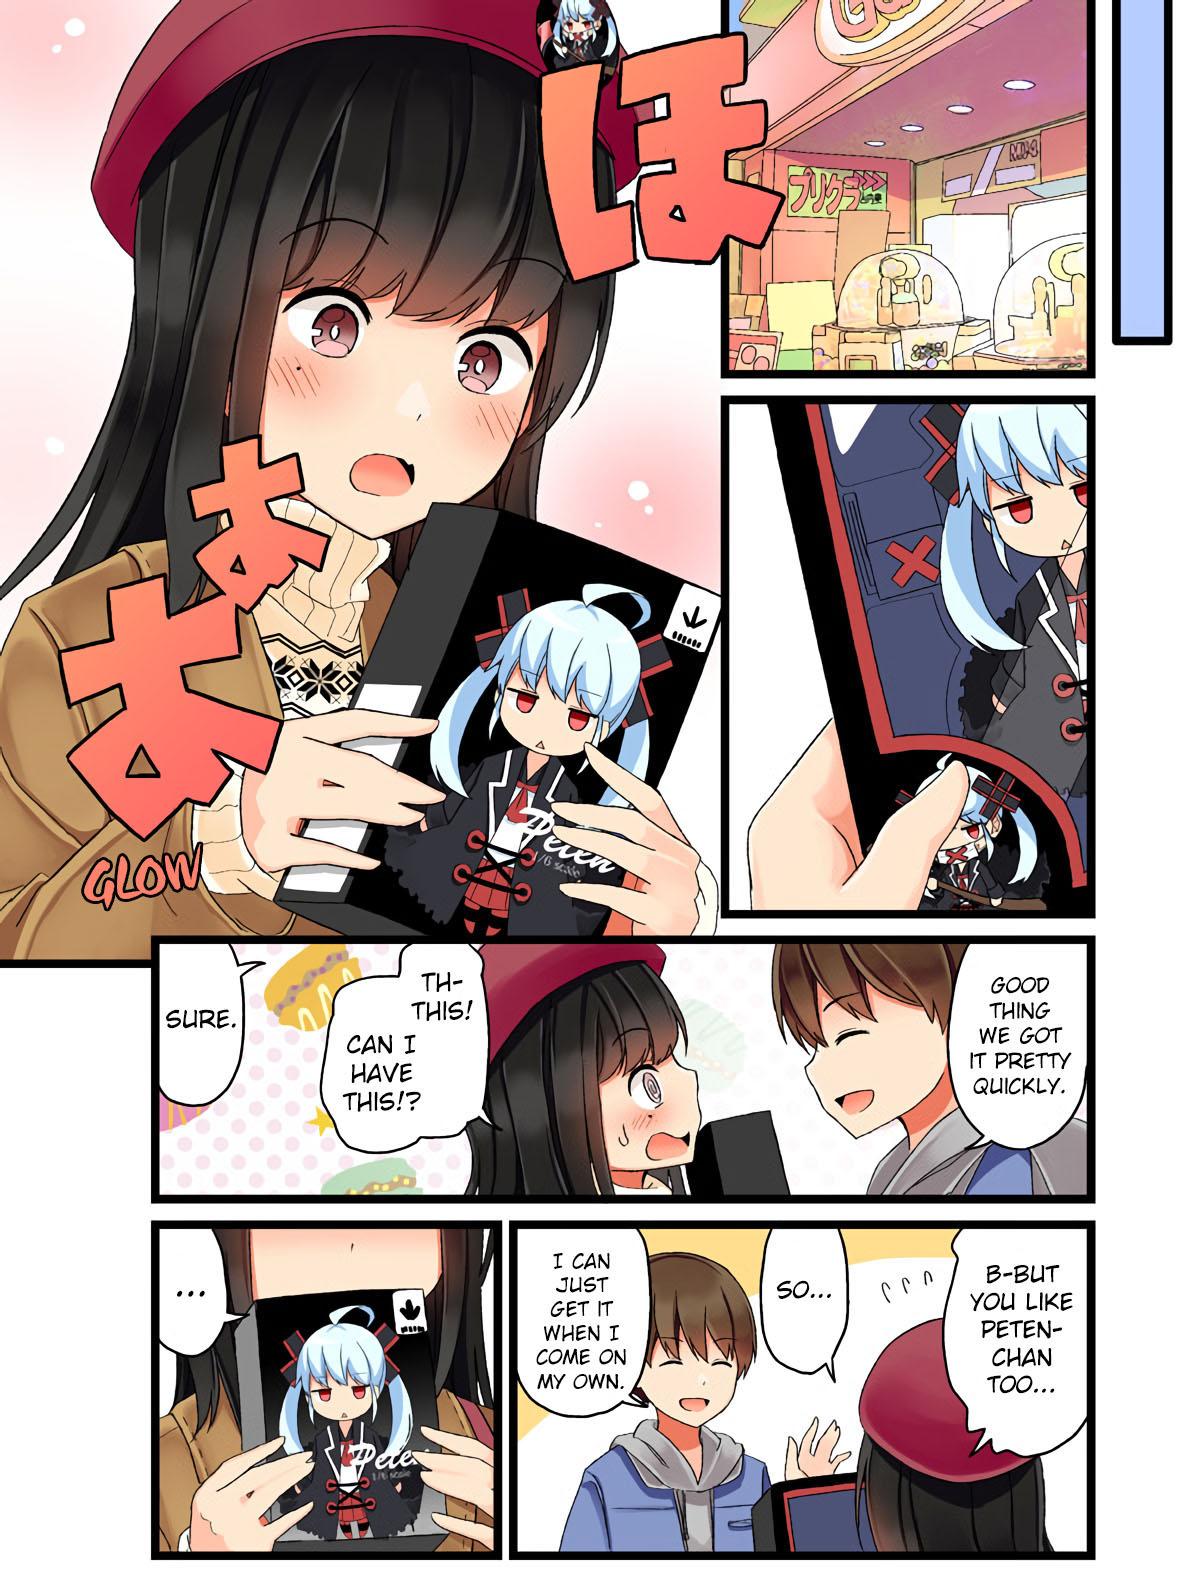 Hanging Out With A Gamer Girl Ch. 3 I Go To The Arcade With My Gamer Friend (2)